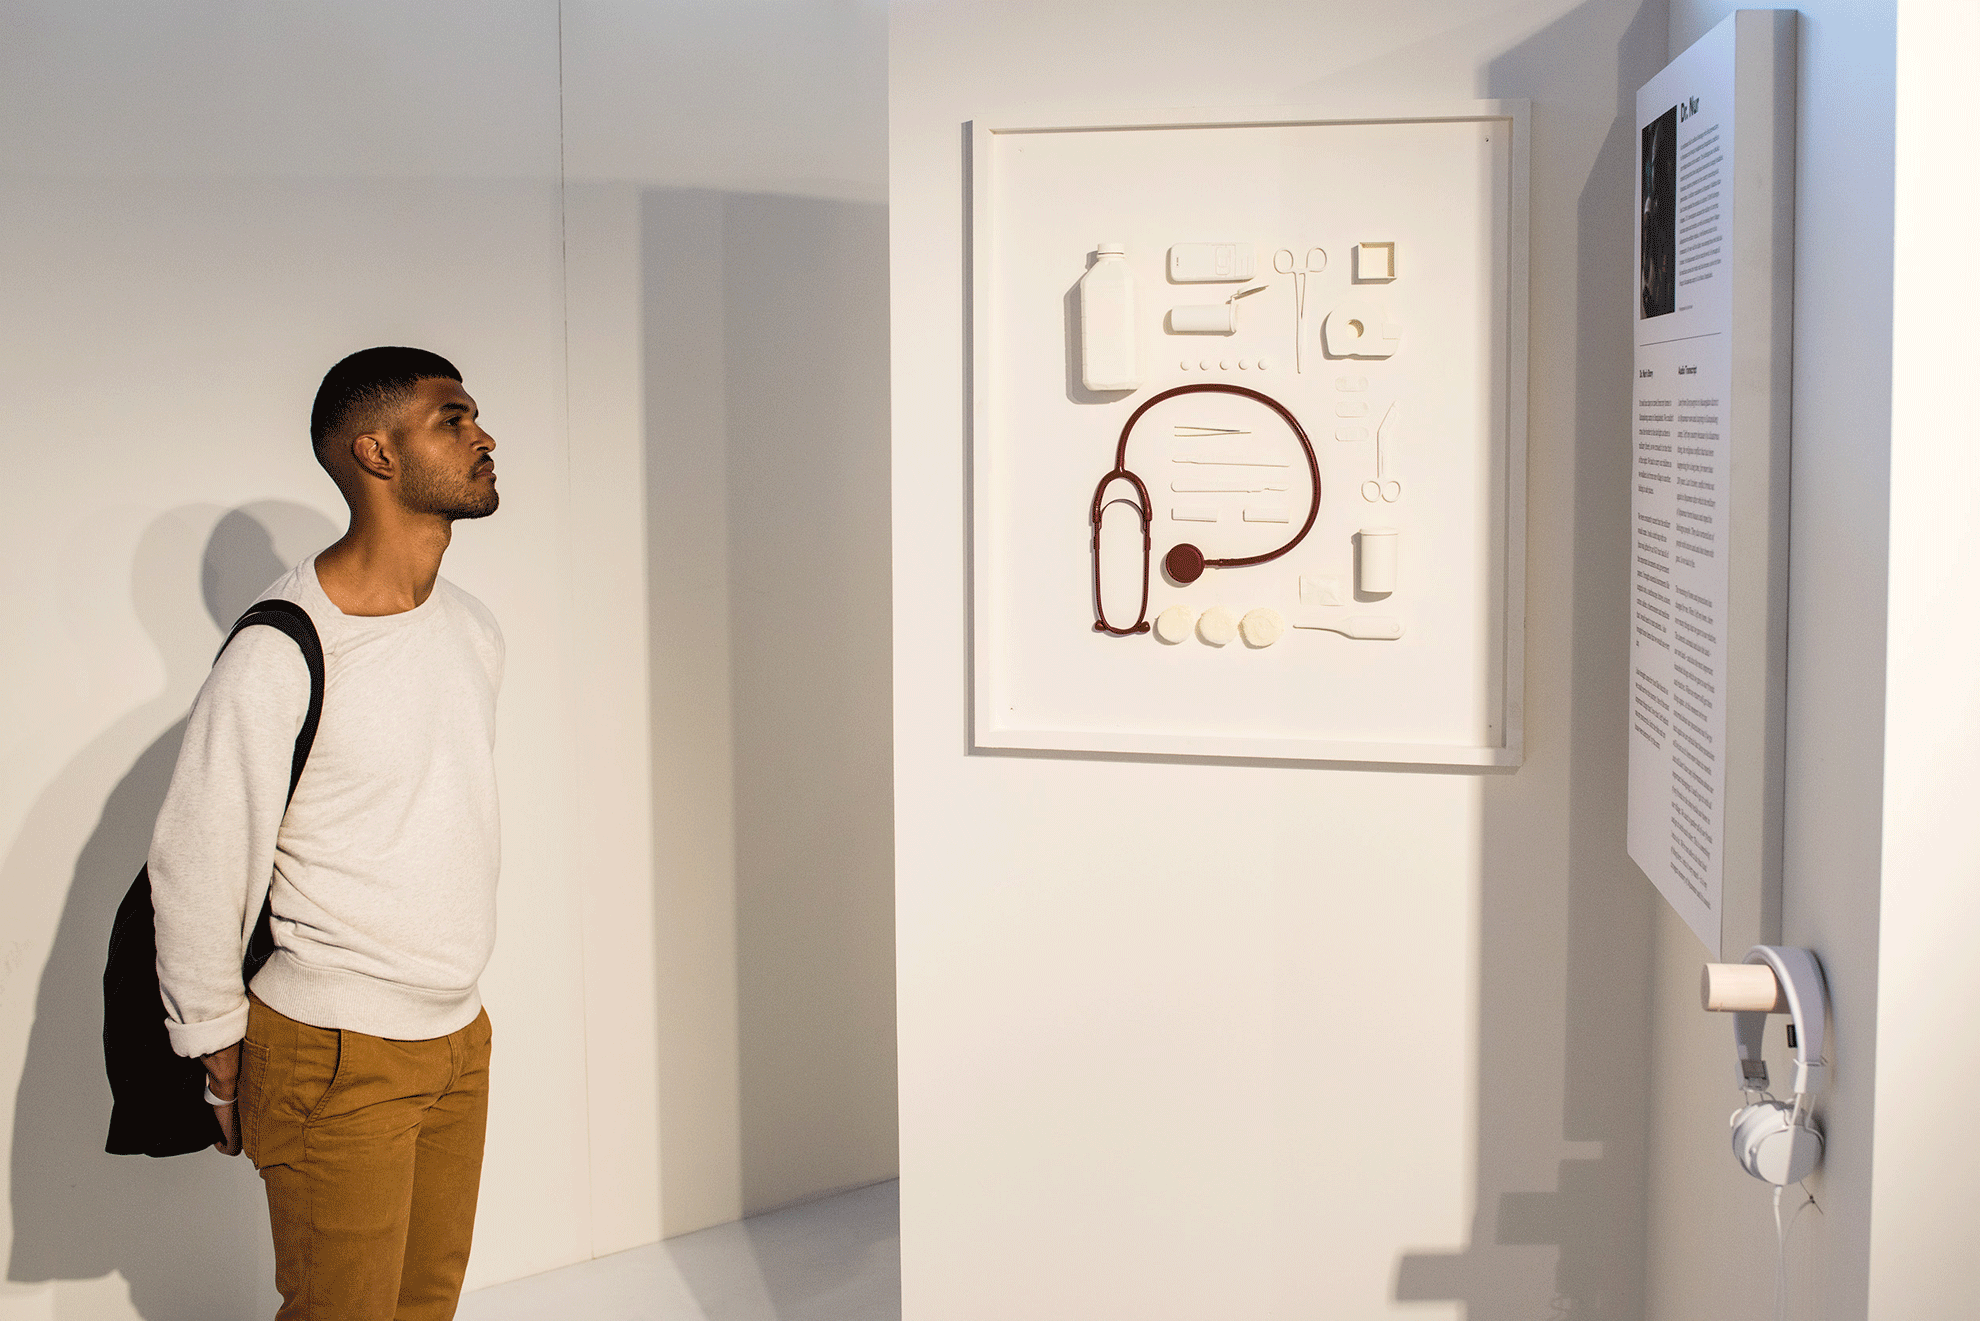 A young man reading display text in a white room.